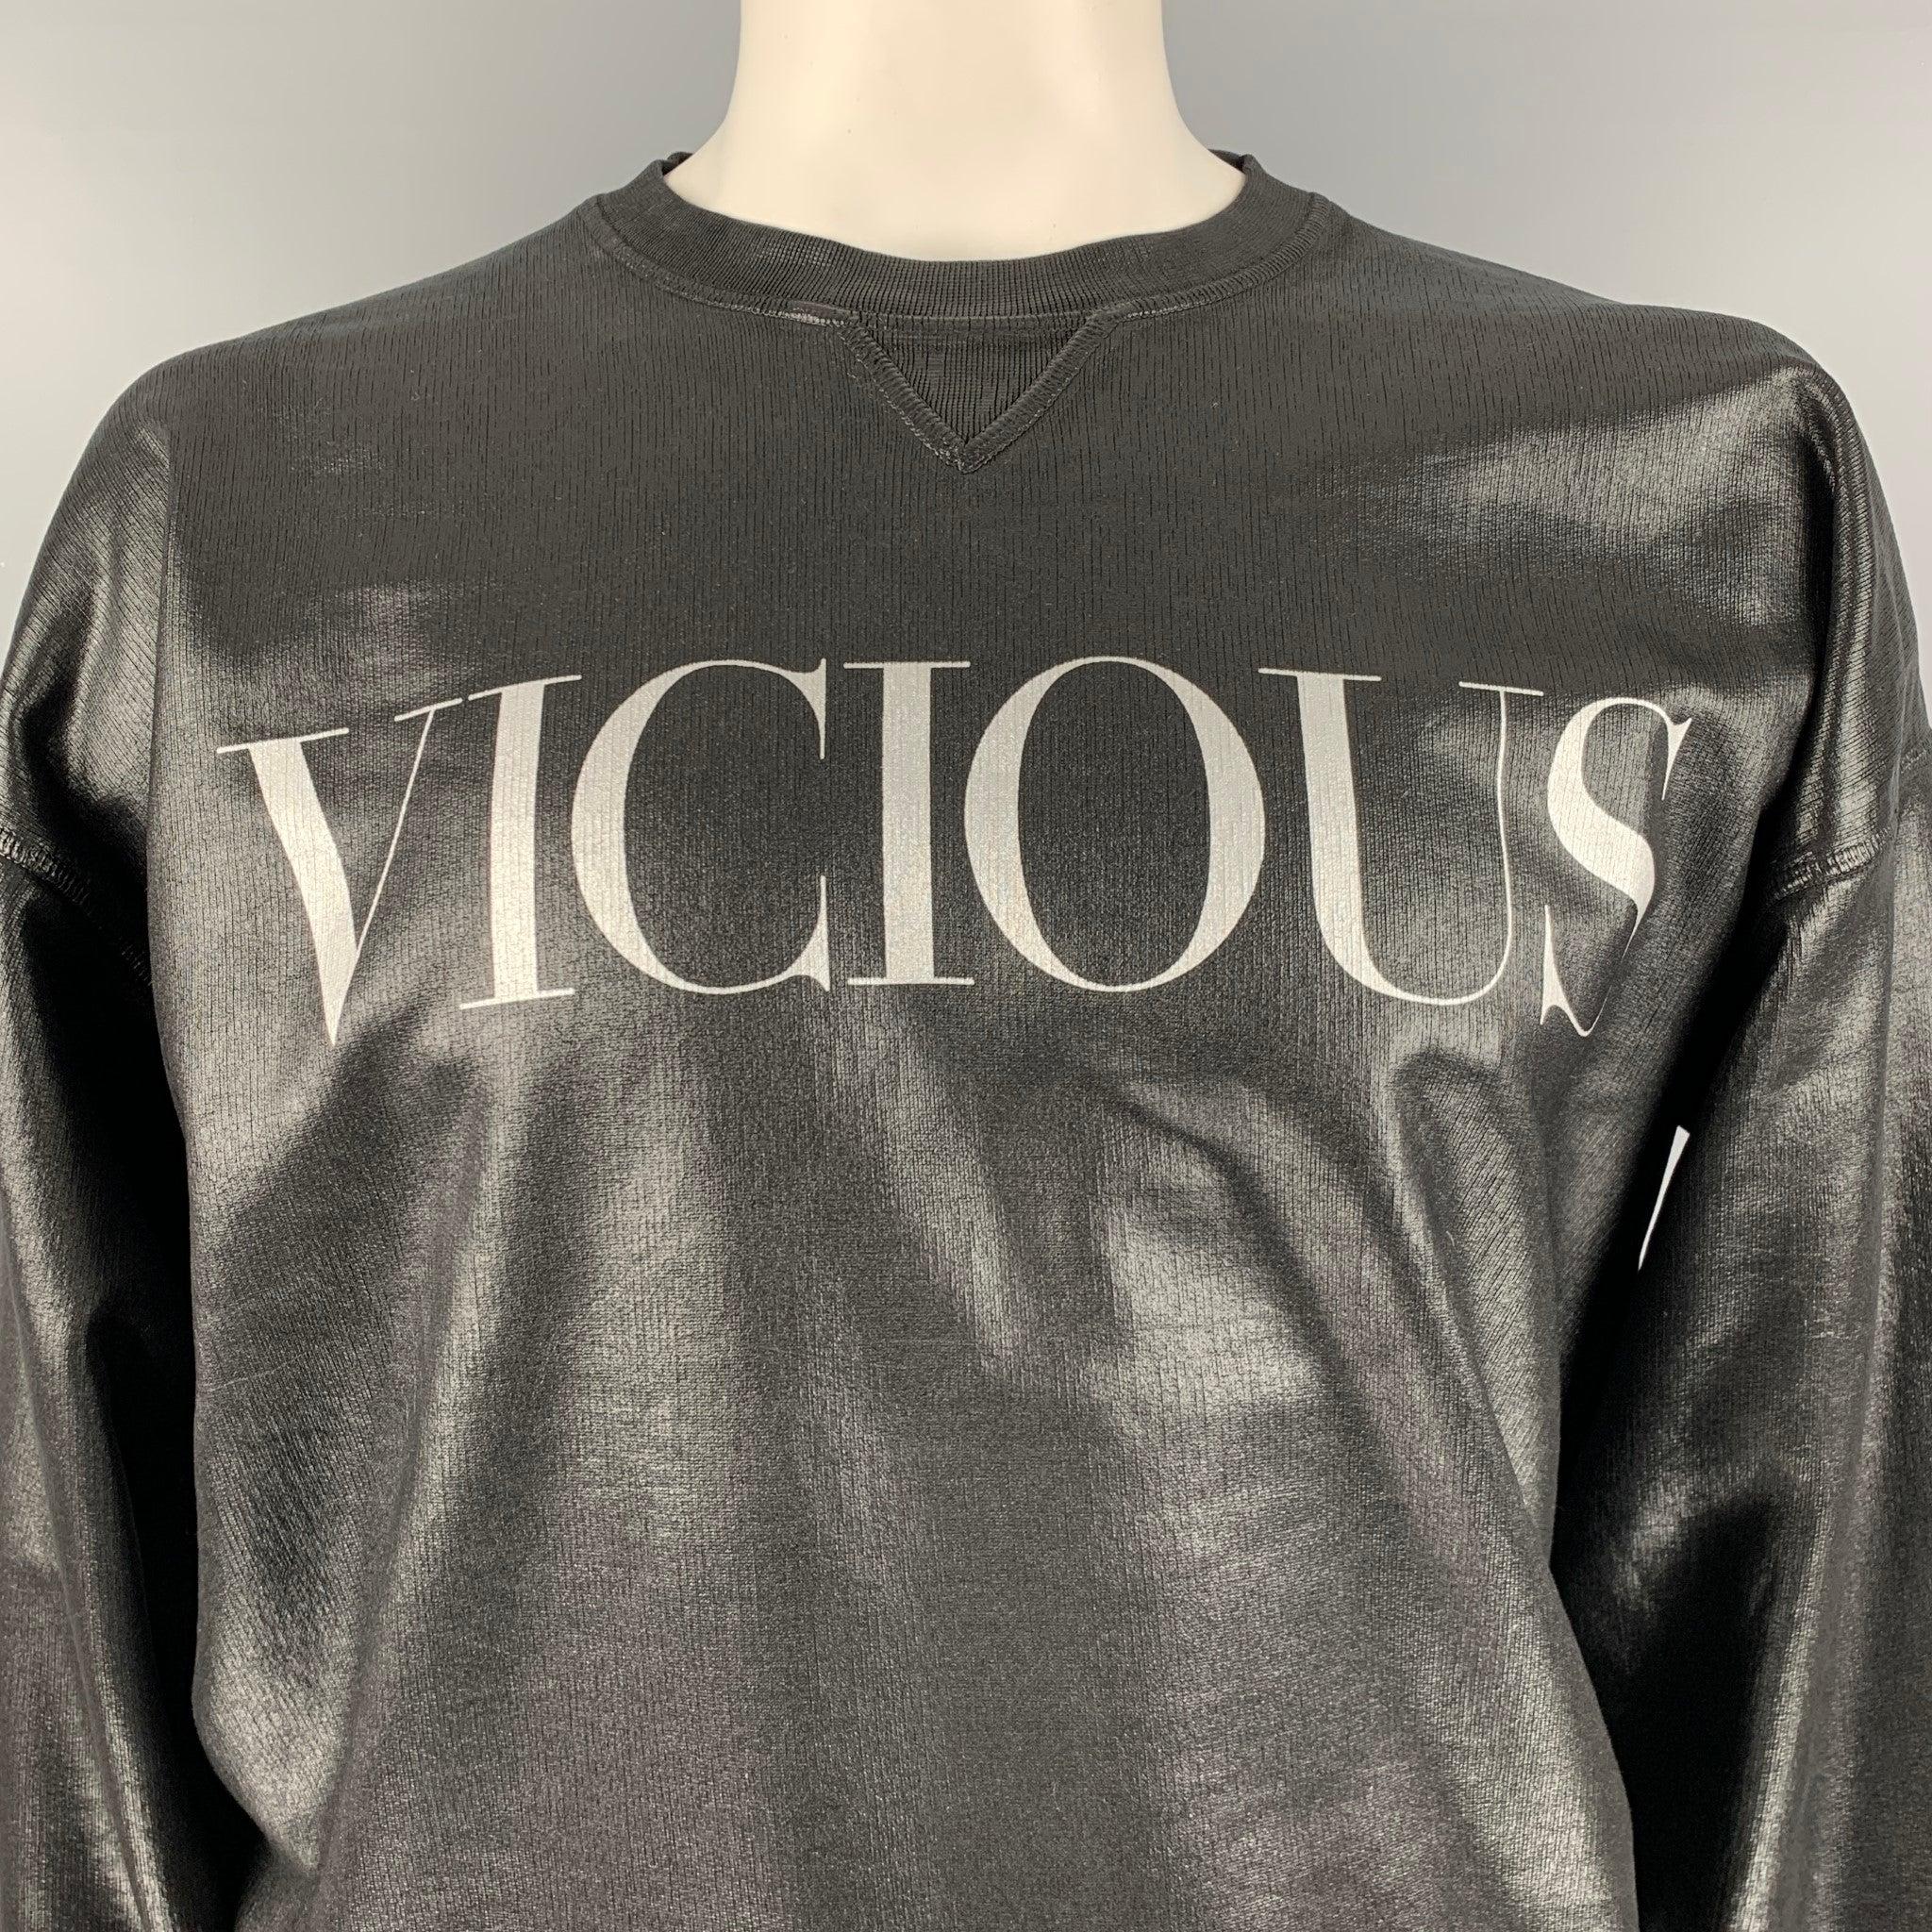 DSQUARED
sweatshirt in a black cotton blend featuring the word 